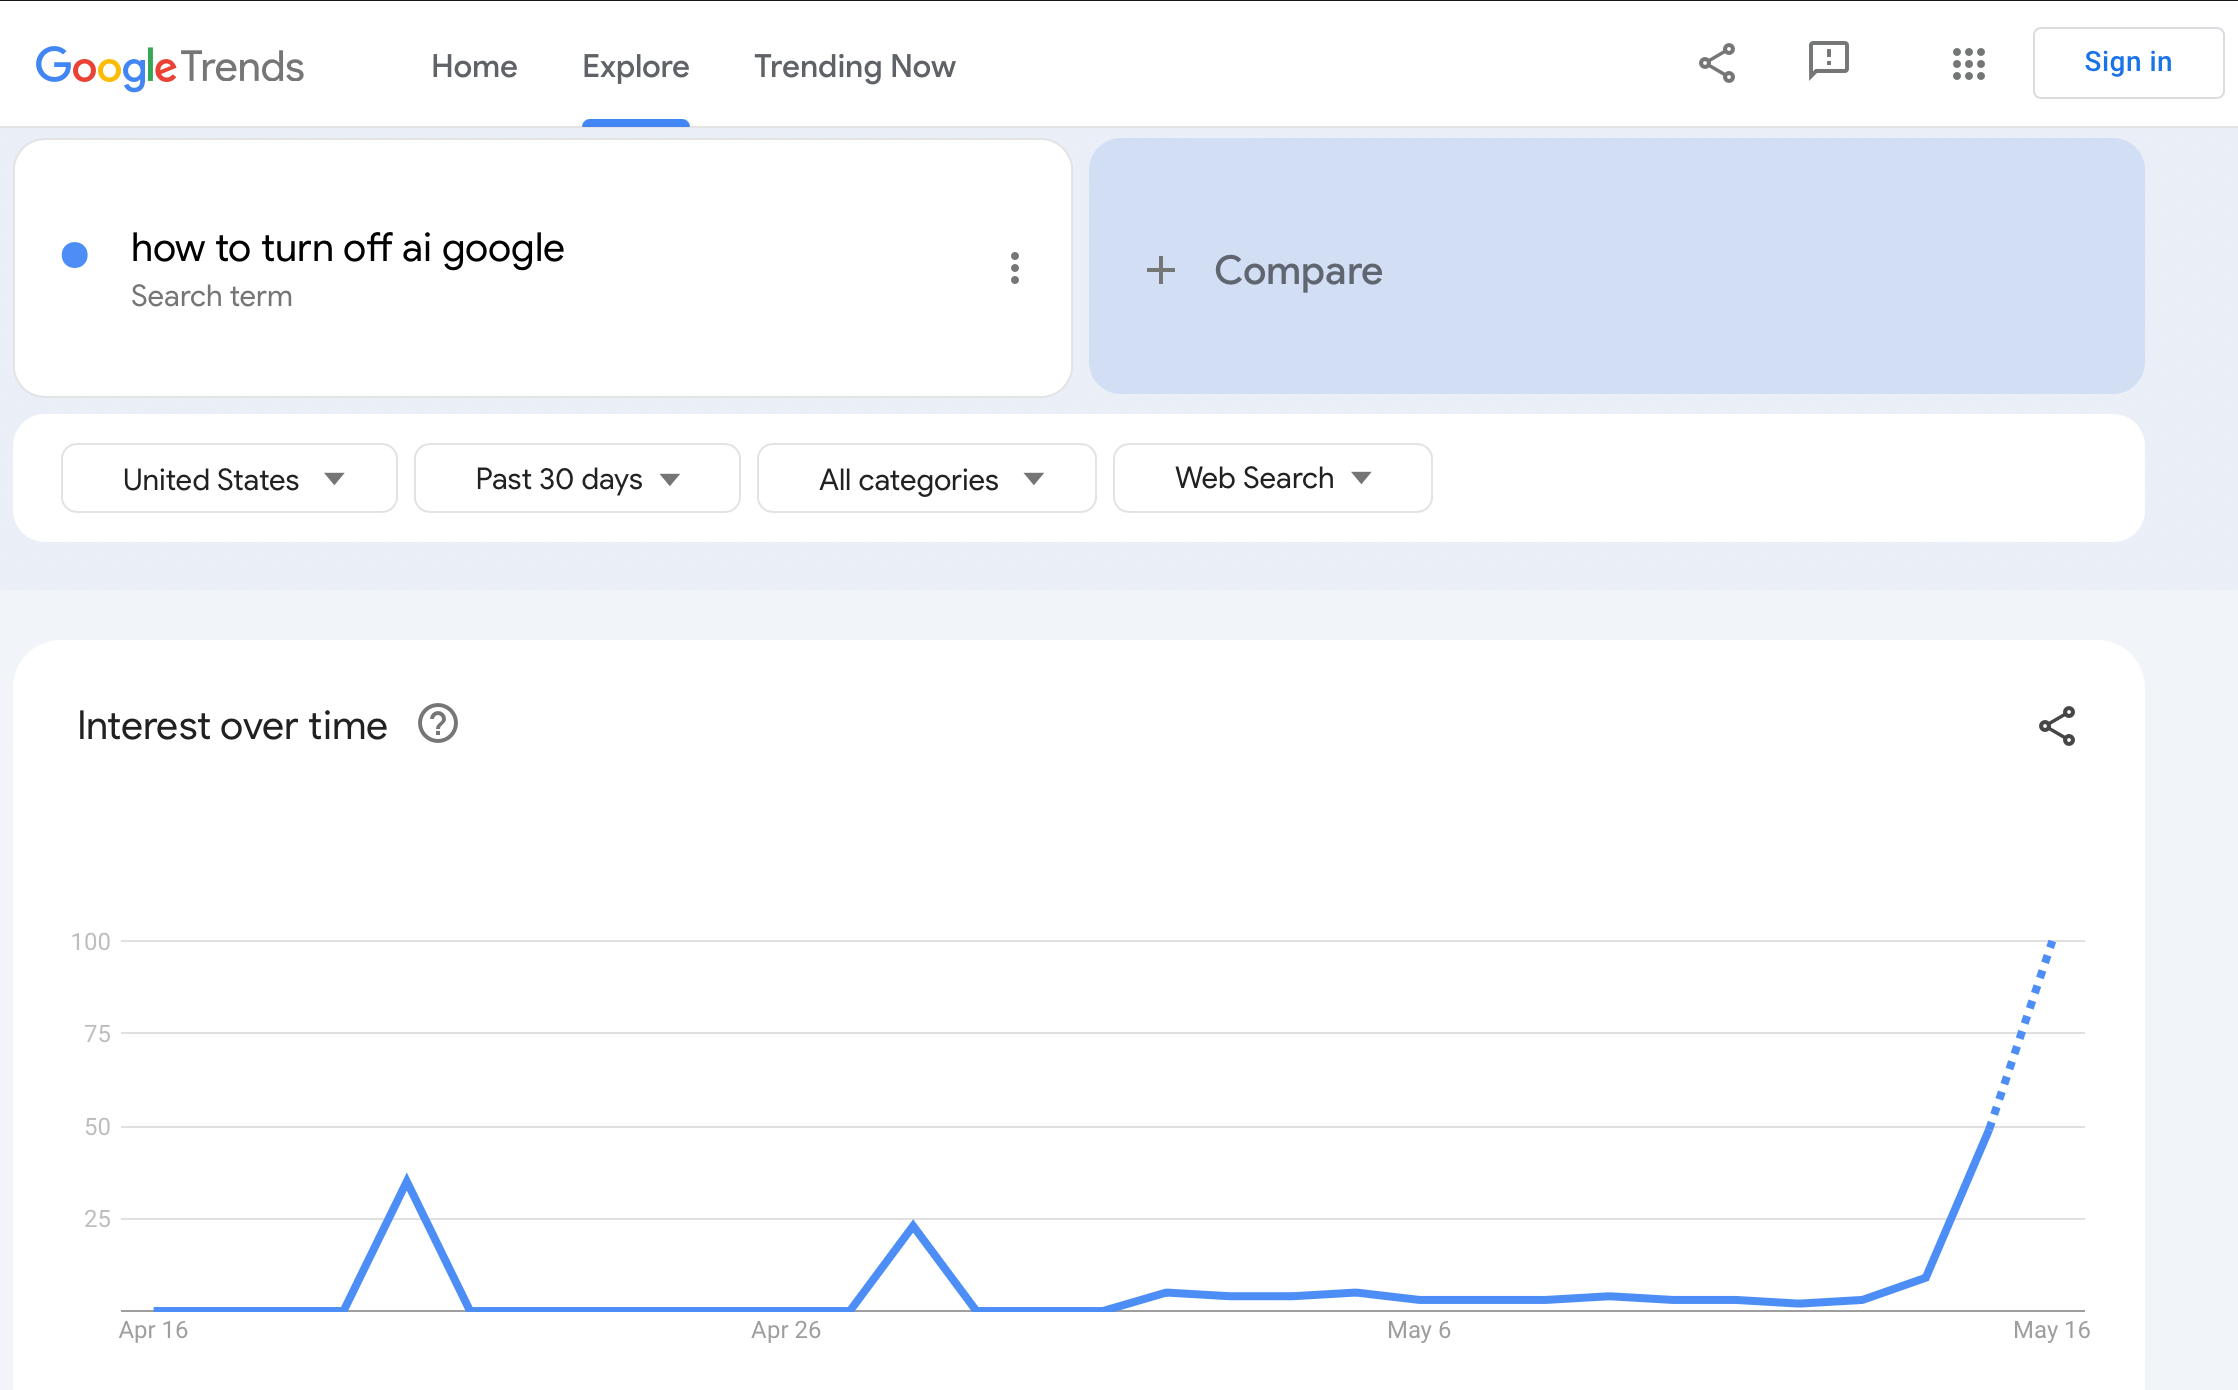 google-trends-emerging-trend-example-screenshot SEO Agency Software (My Tried and Tested Tools)